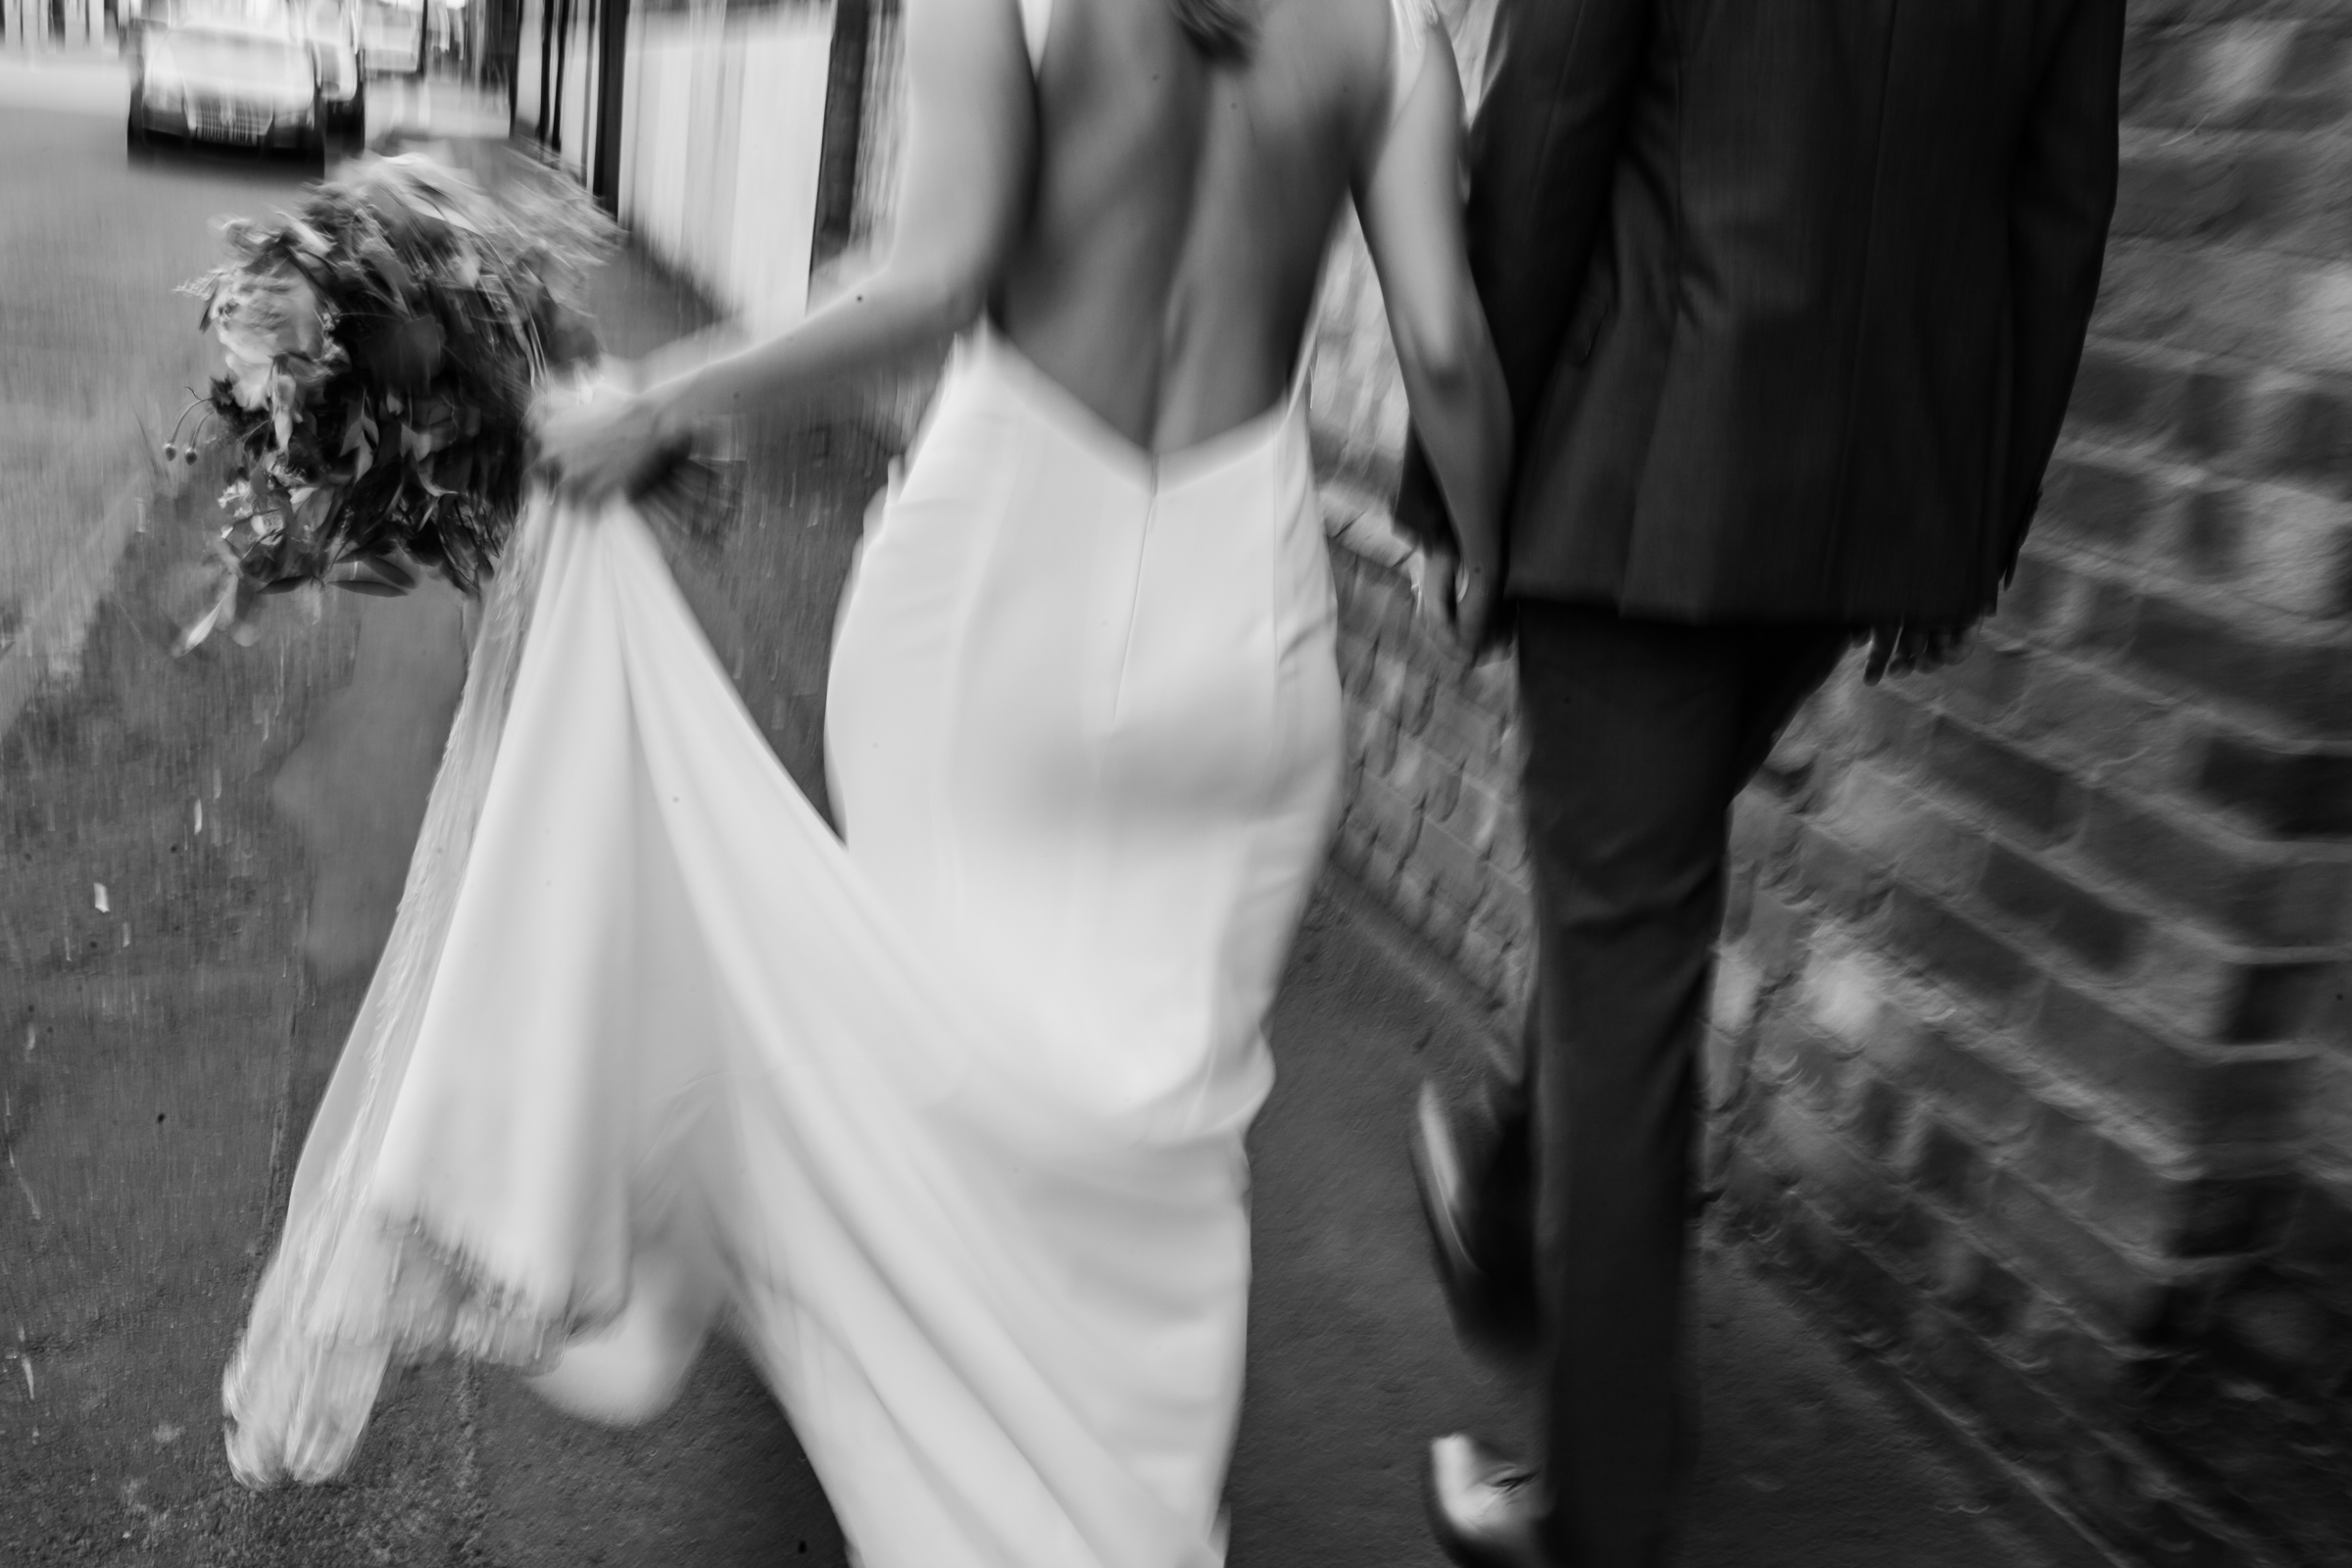 a bride and groom walk the image is out of focus in Digbeth Birmingham 